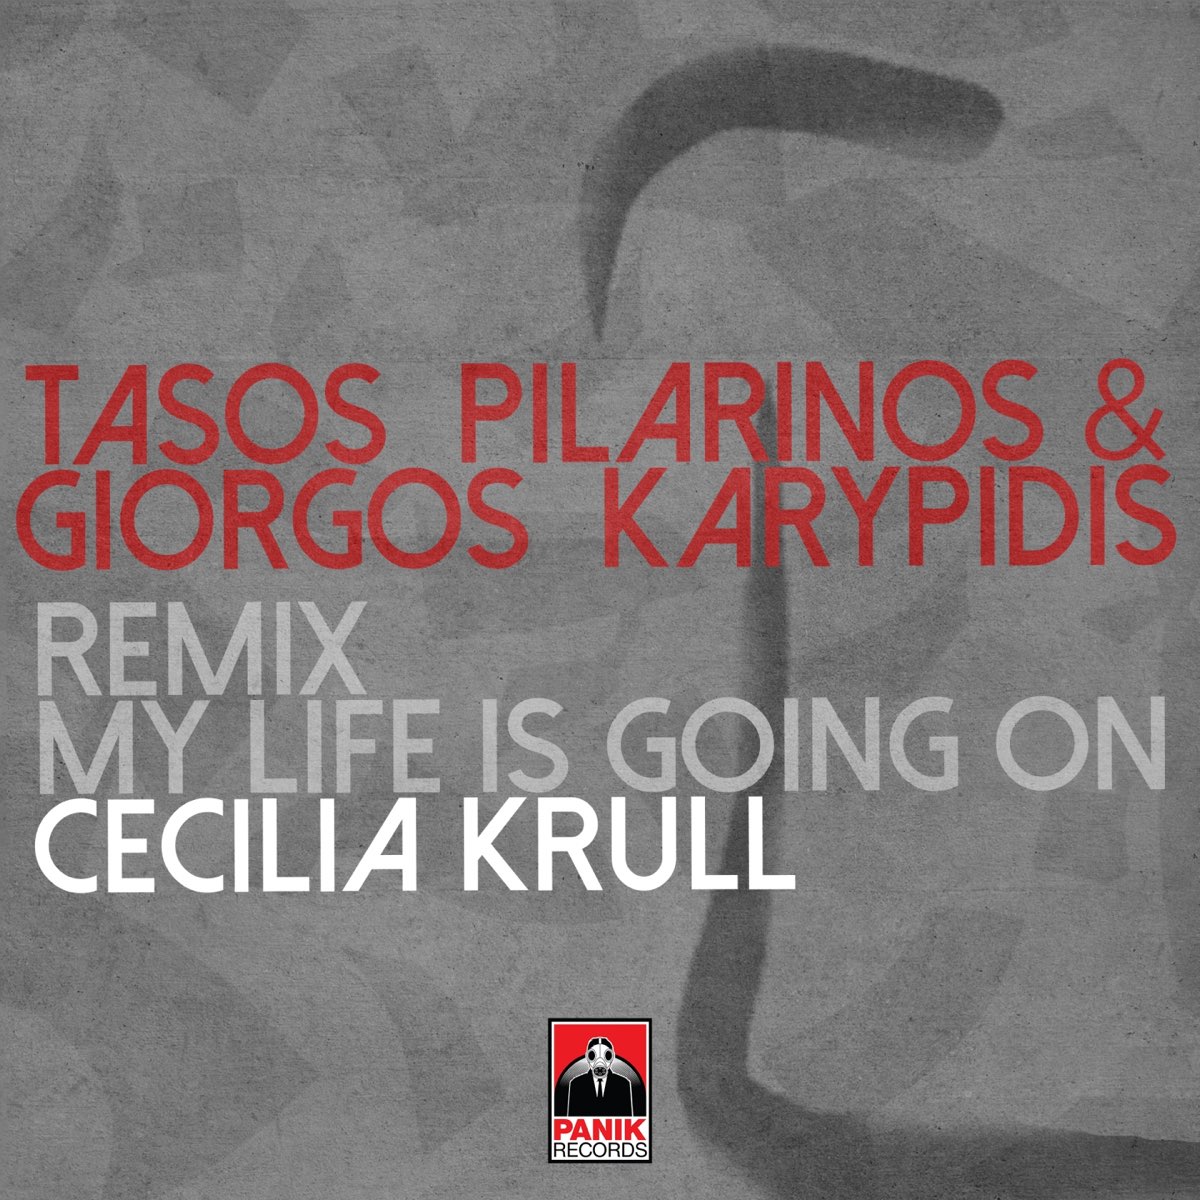 My Life is going on Cecilia Krull. My Life is going on - Cecilia Krull Ноты. My Life is going on from la casa de papel Cecilia Krull перевод. Burak Yeter & Cecilia Krull - my Life is going on.